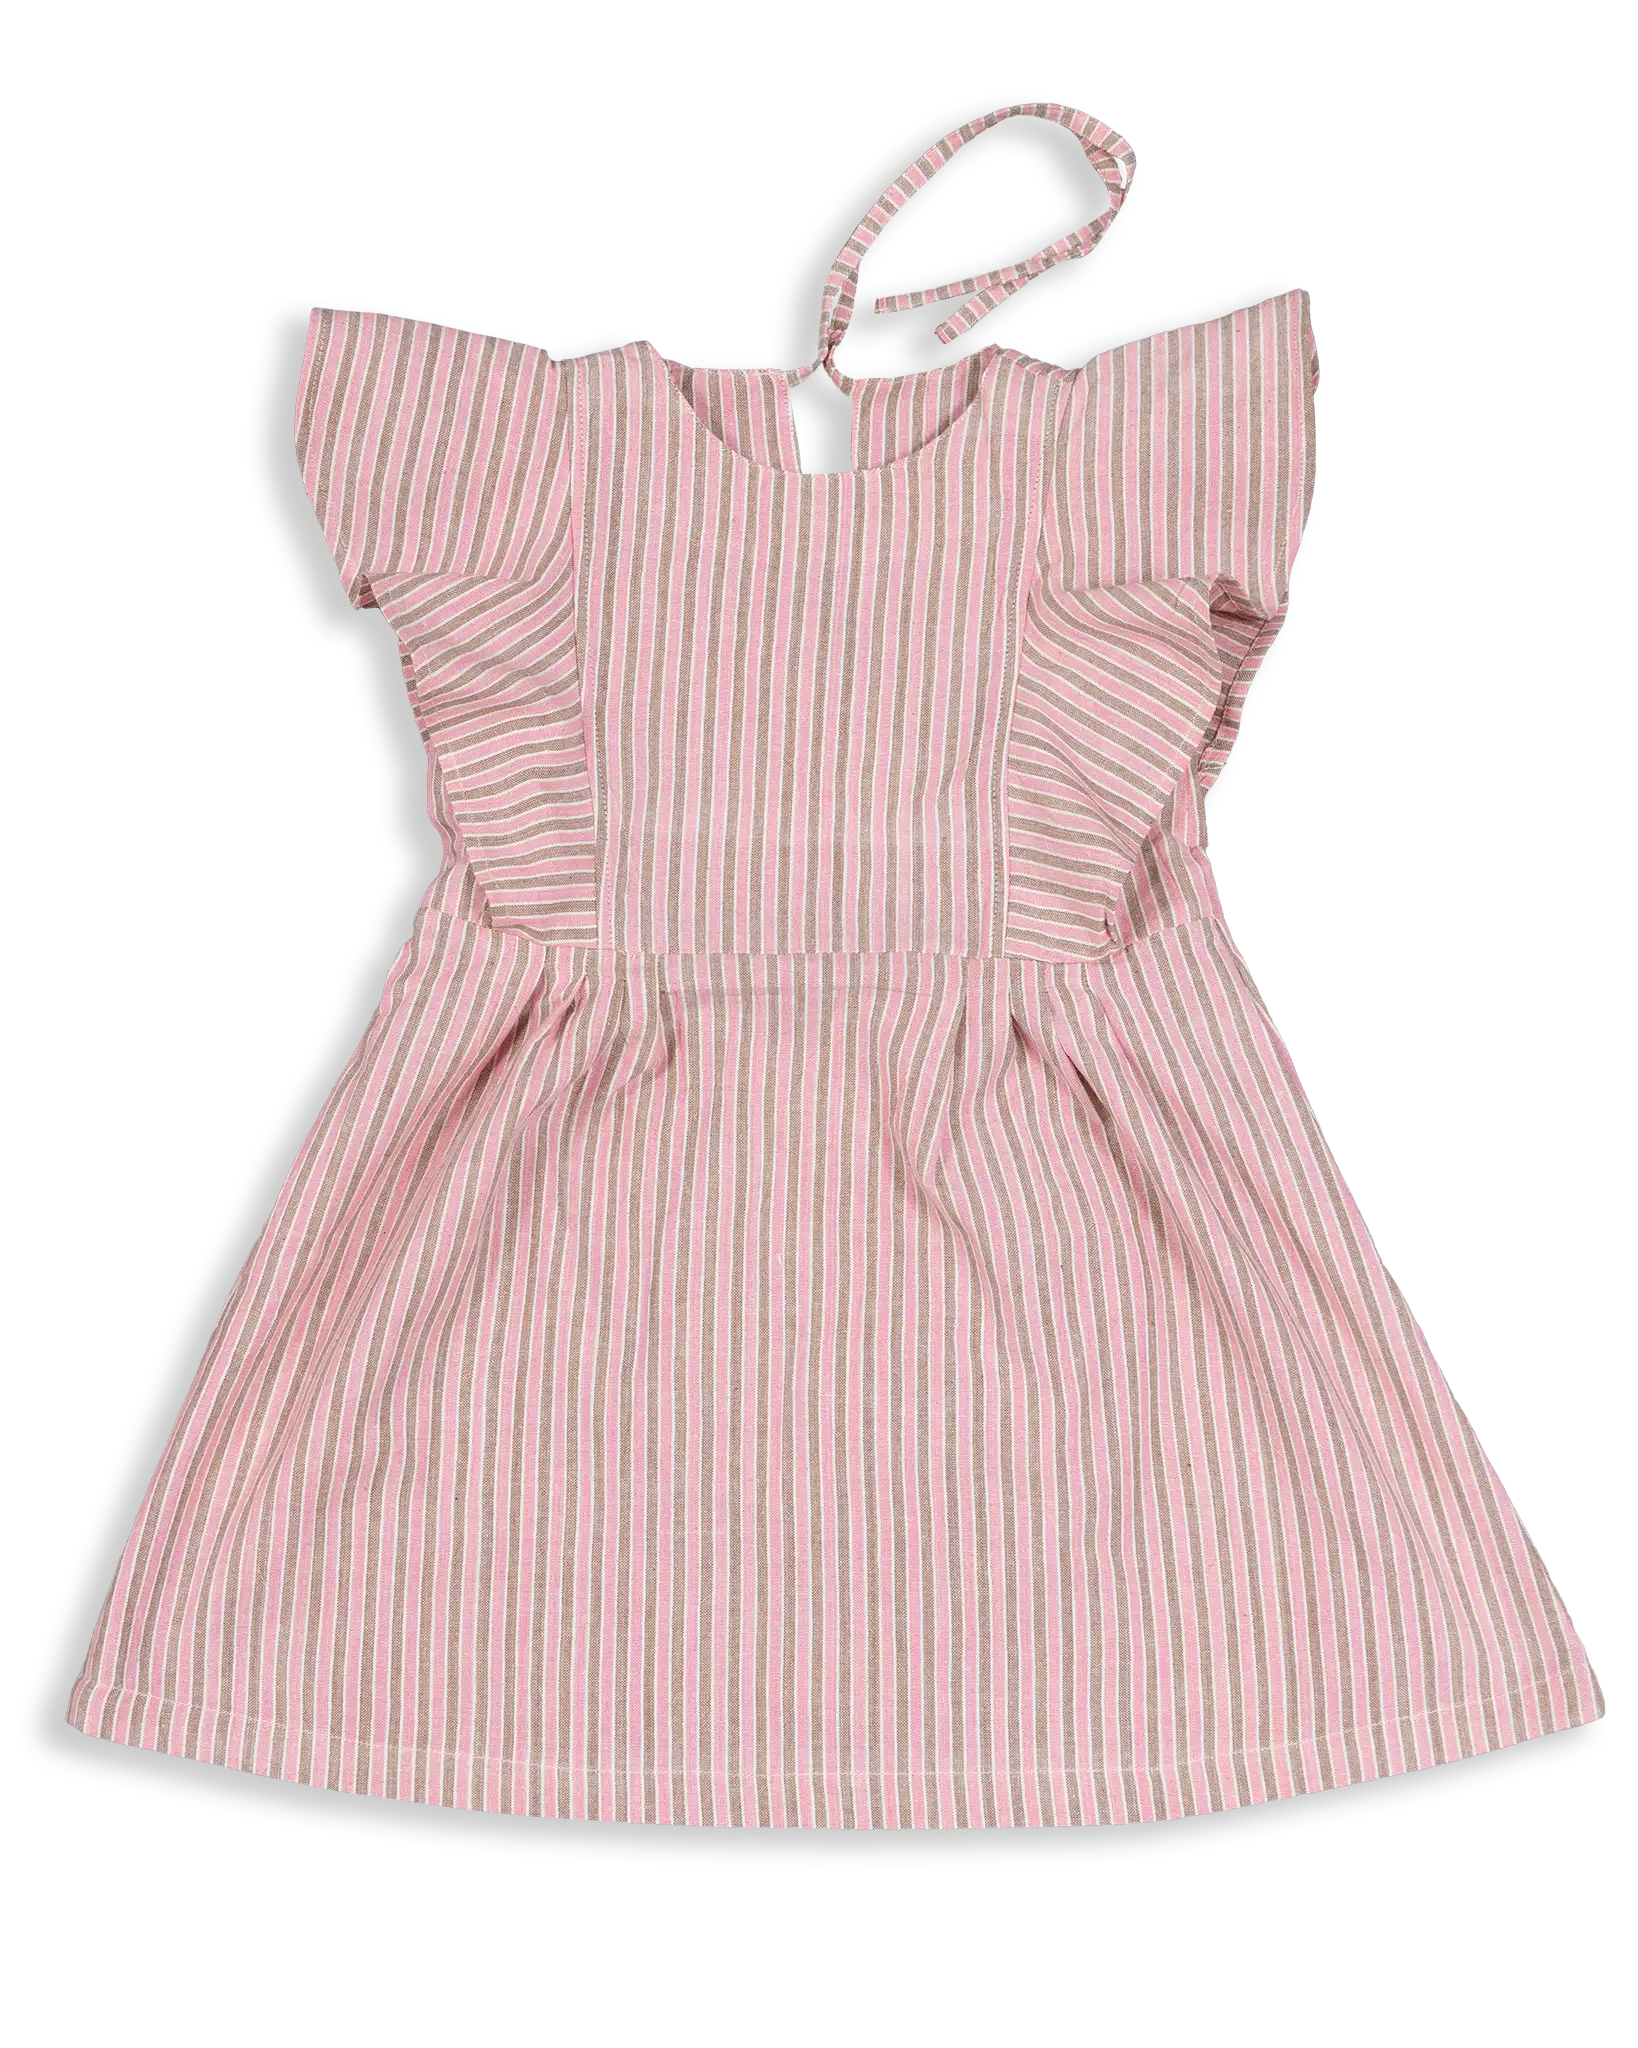 The neckline of this dress is pleated and a back slit with string to tie or zipper. We made the string in the back not only for convenience but to bring bonding between her and her parents.